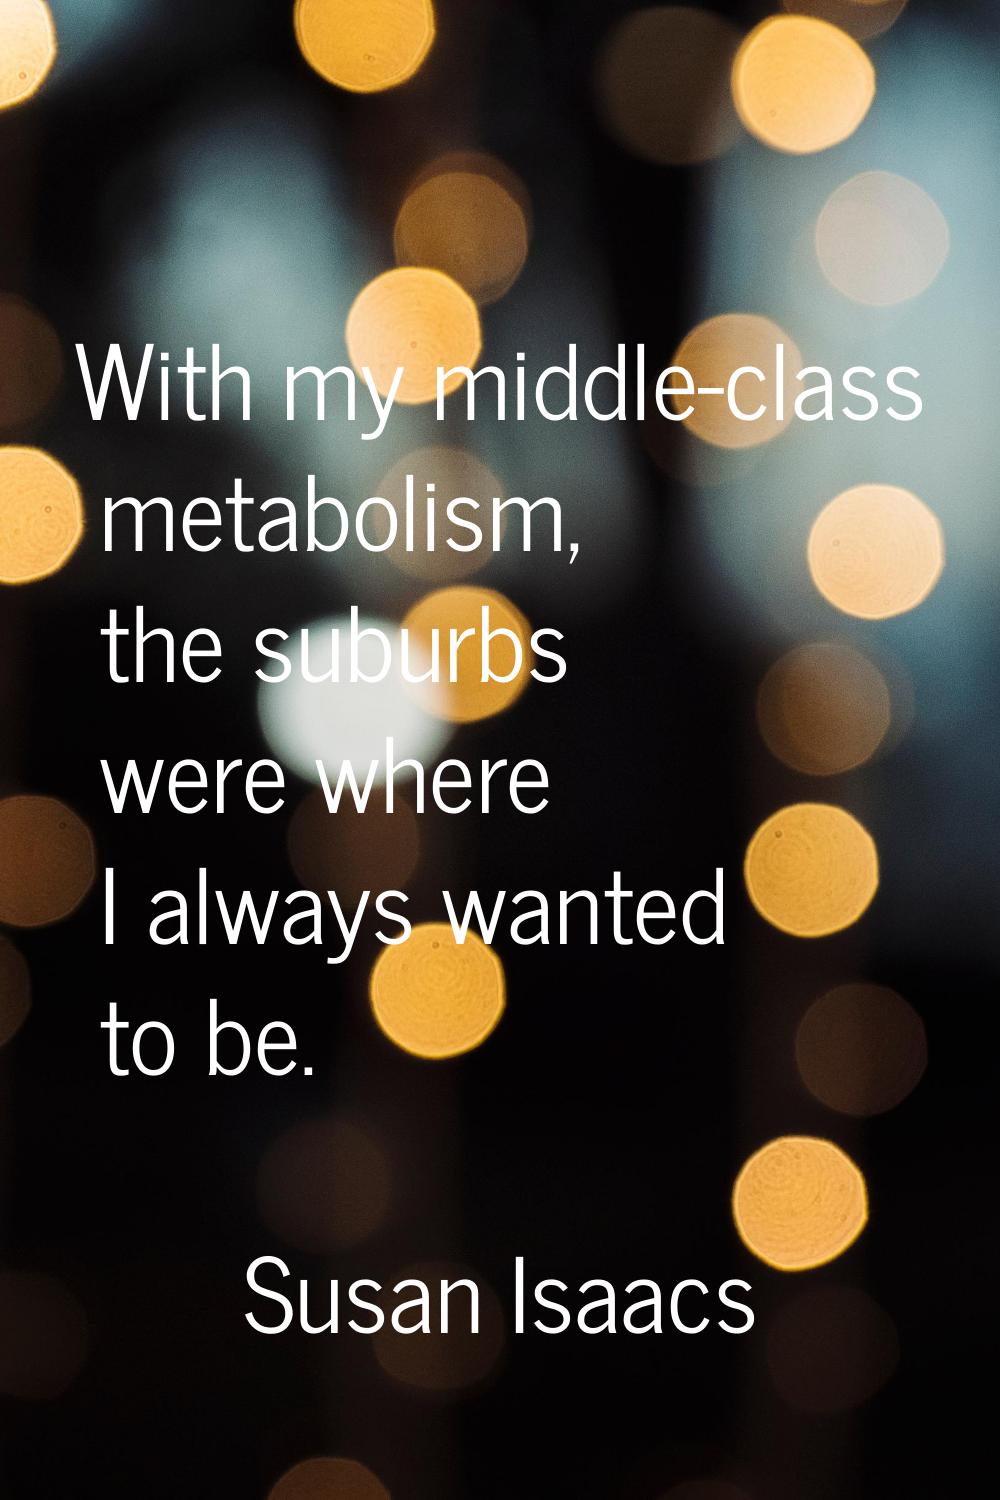 With my middle-class metabolism, the suburbs were where I always wanted to be.